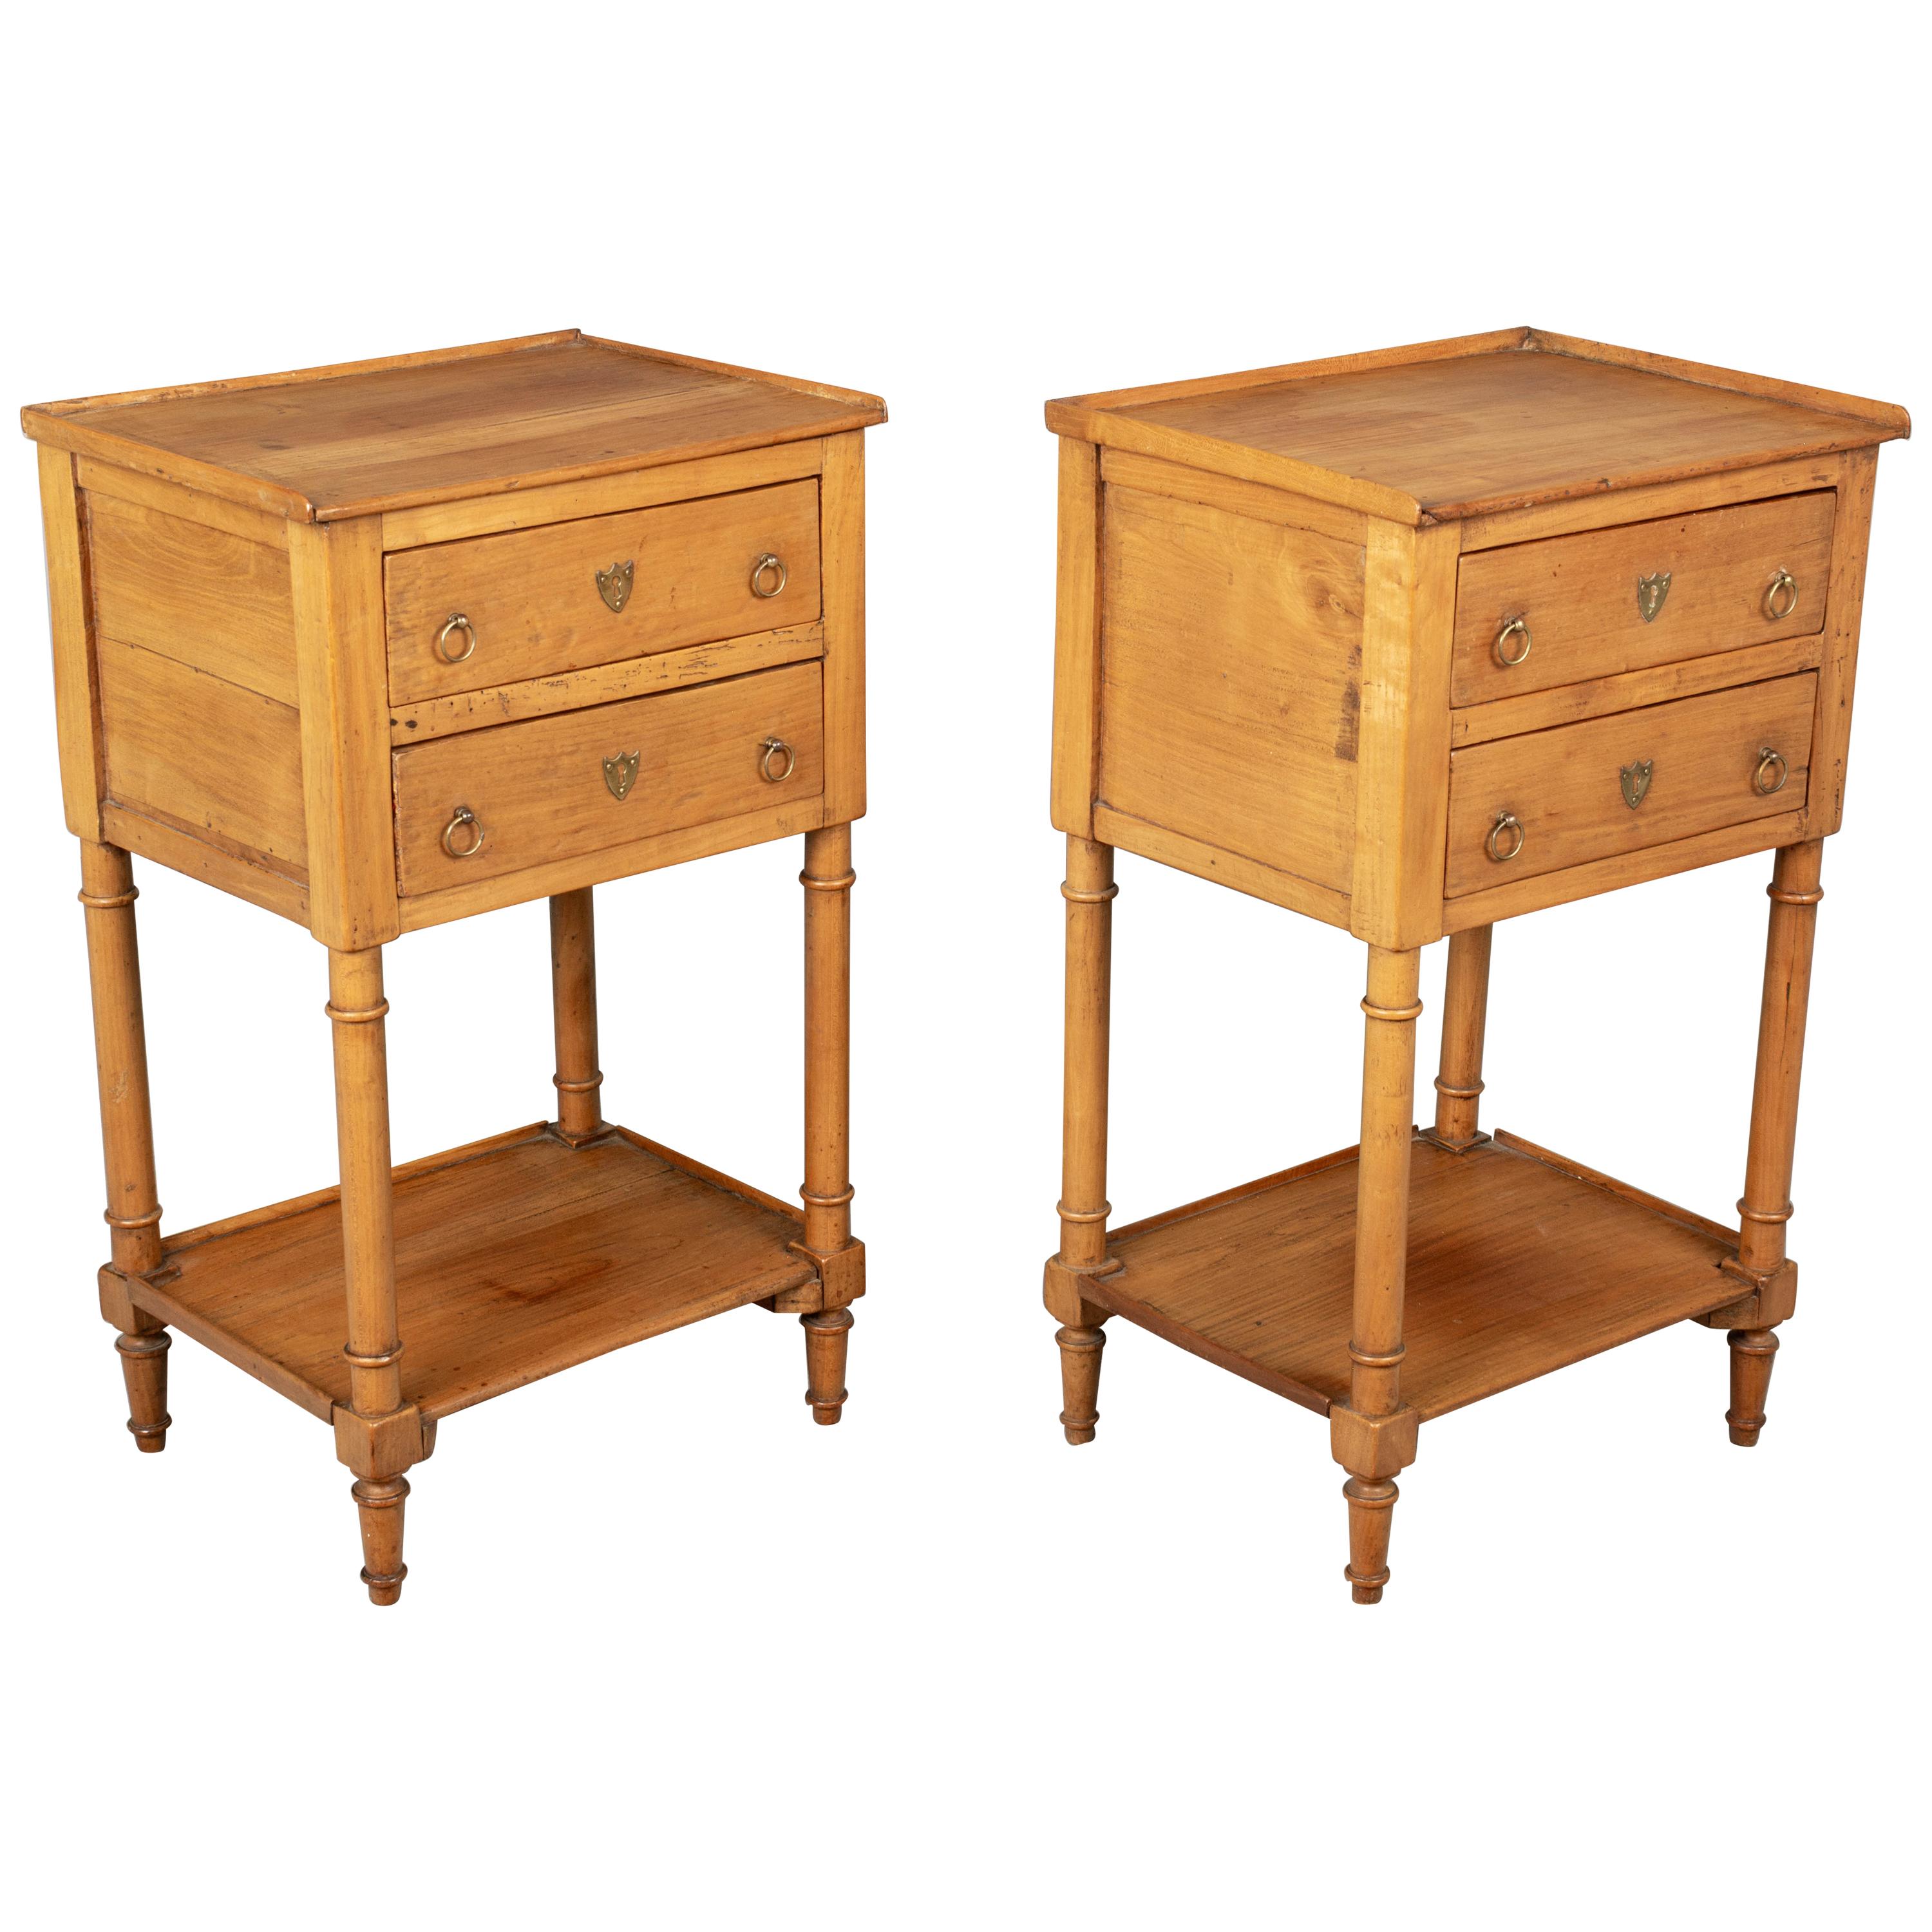 Country French Side Tables or Nightstands, a Pair